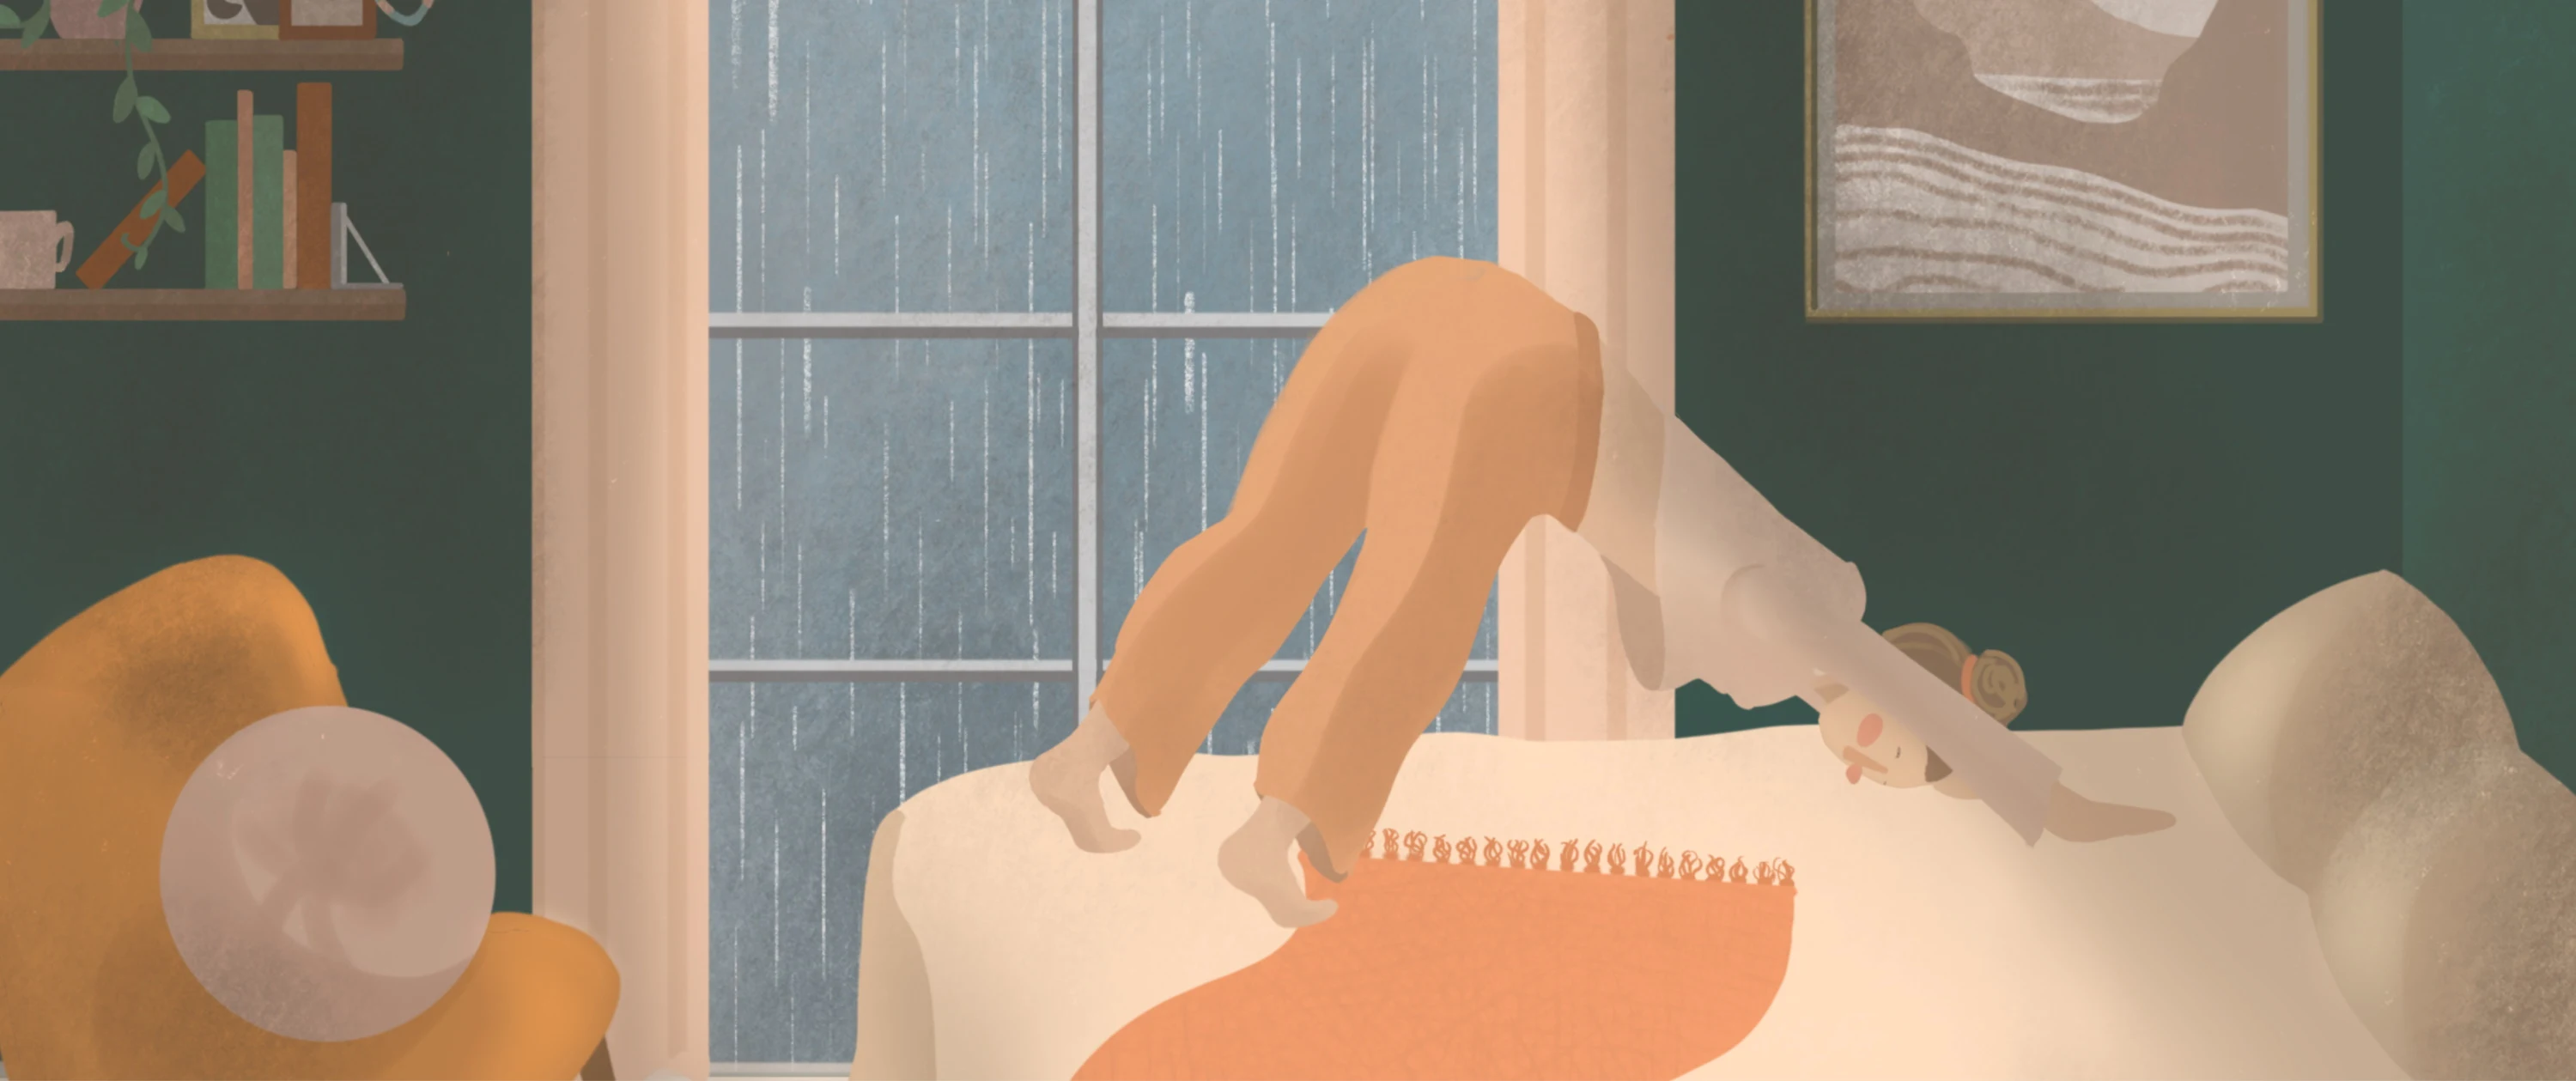 Illustration of a girl in a bedroom, doing a downward dog yoga pose on the bed. The window in the background shows heavy rain